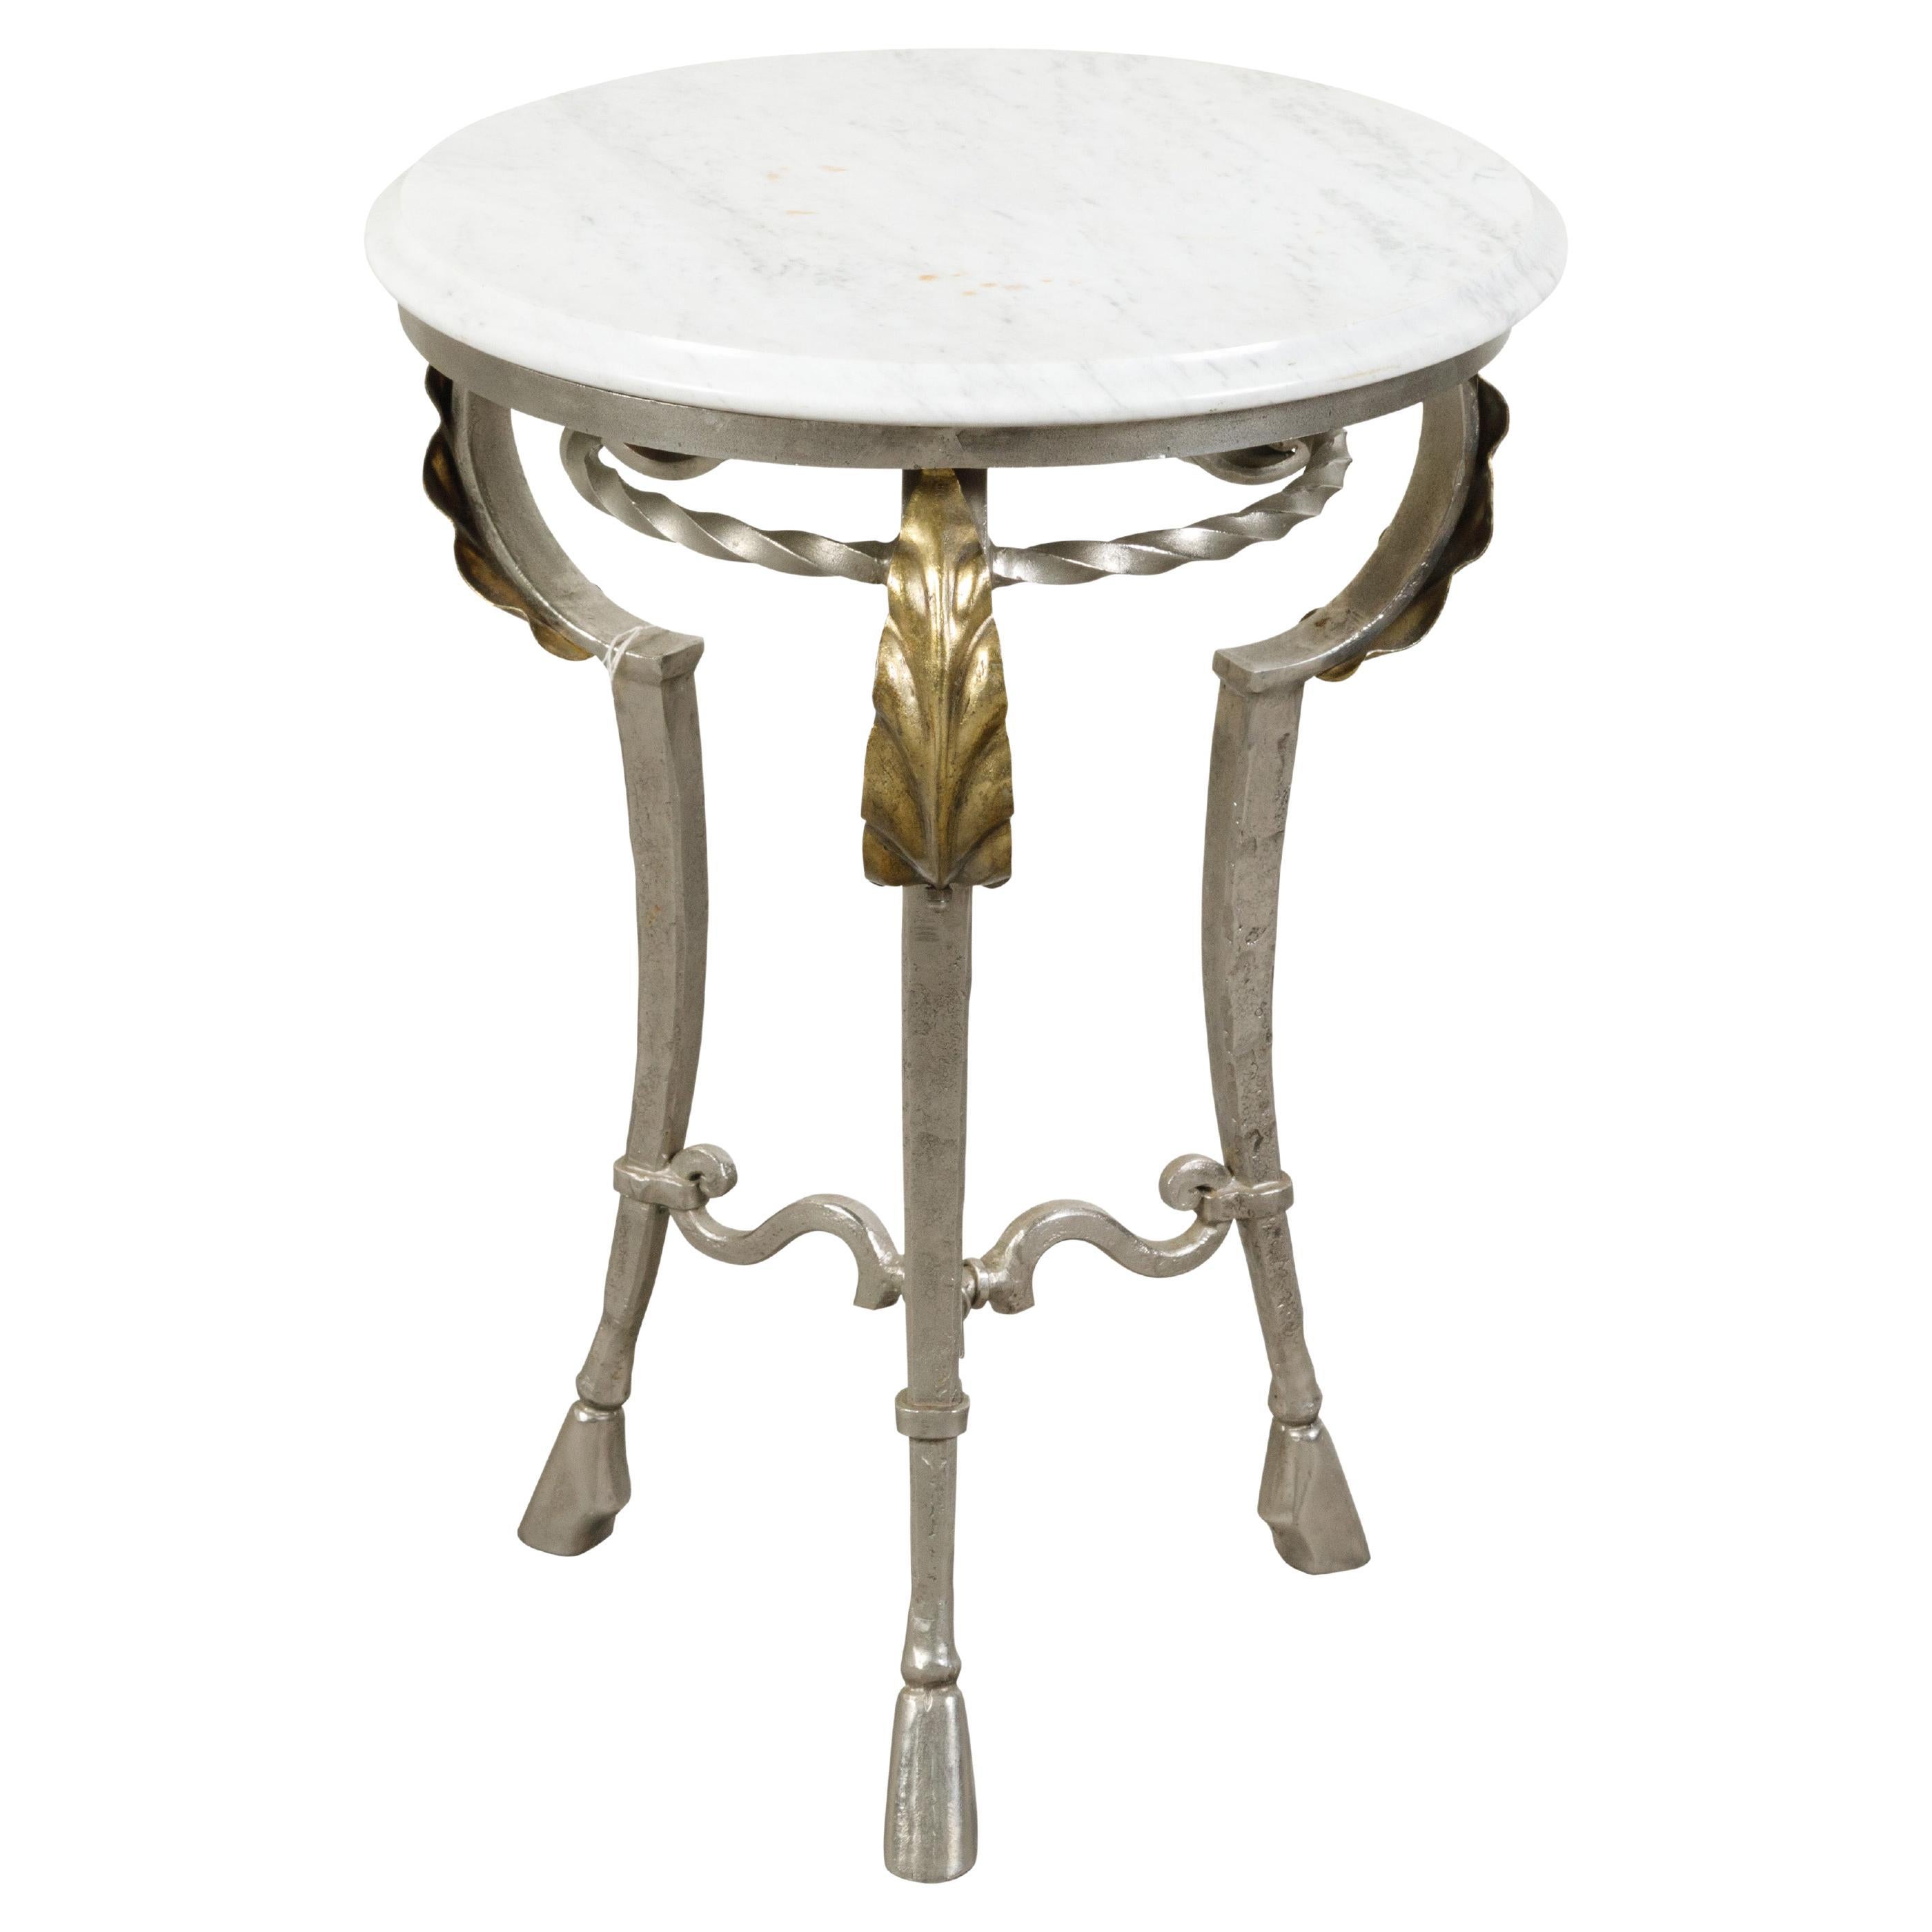 Italian Midcentury Steel Side Table with Circular White Marble Top and Hoof Feet For Sale